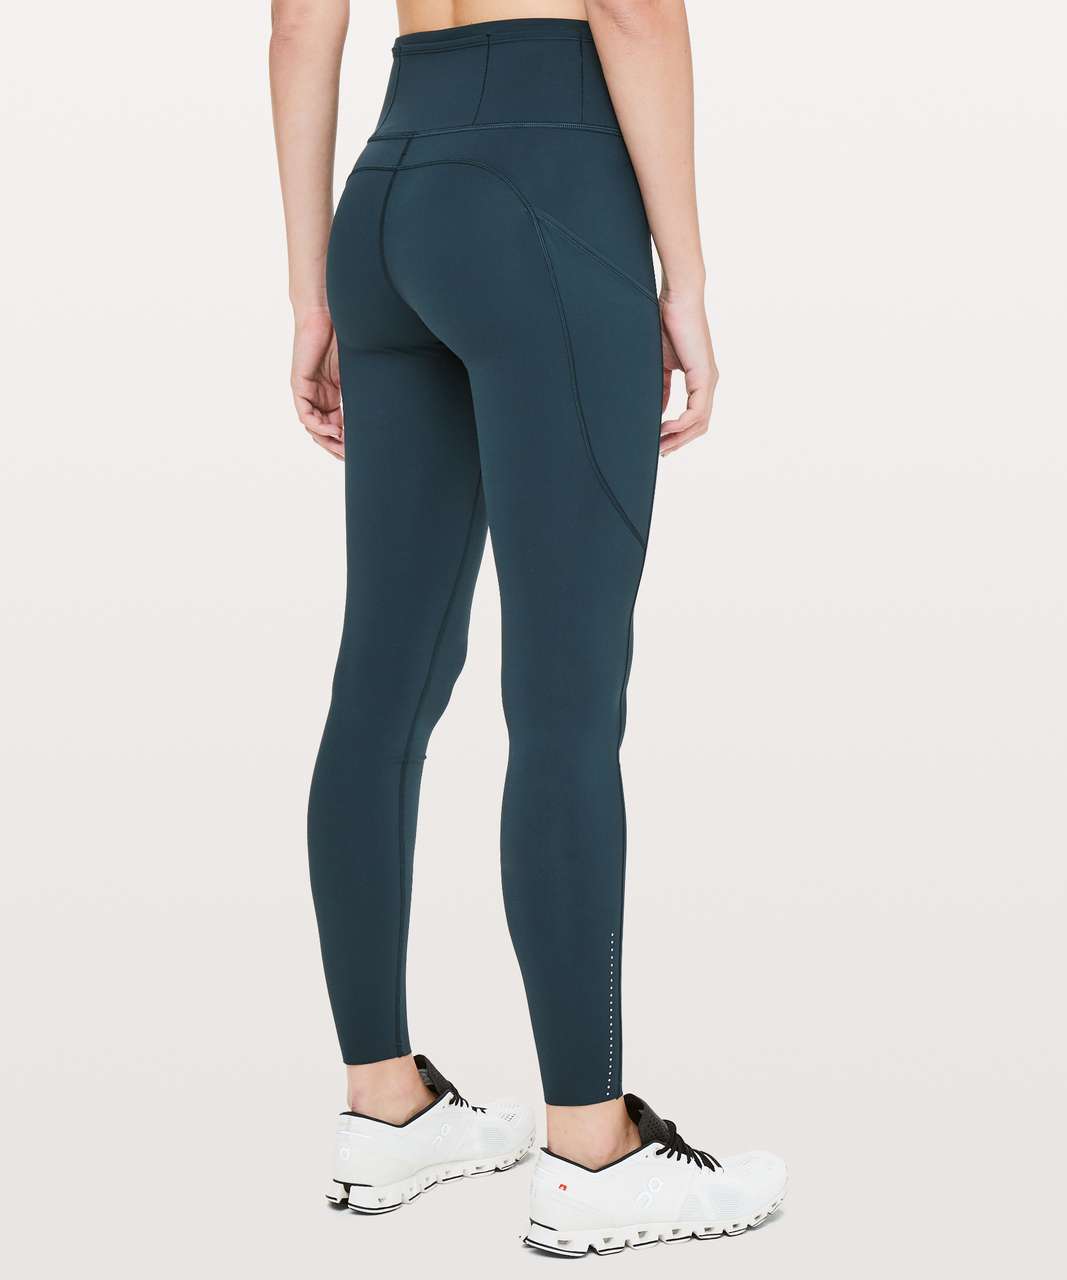 Lululemon Fast & Free Full Length Tight *Nulux 28" - Nocturnal Teal